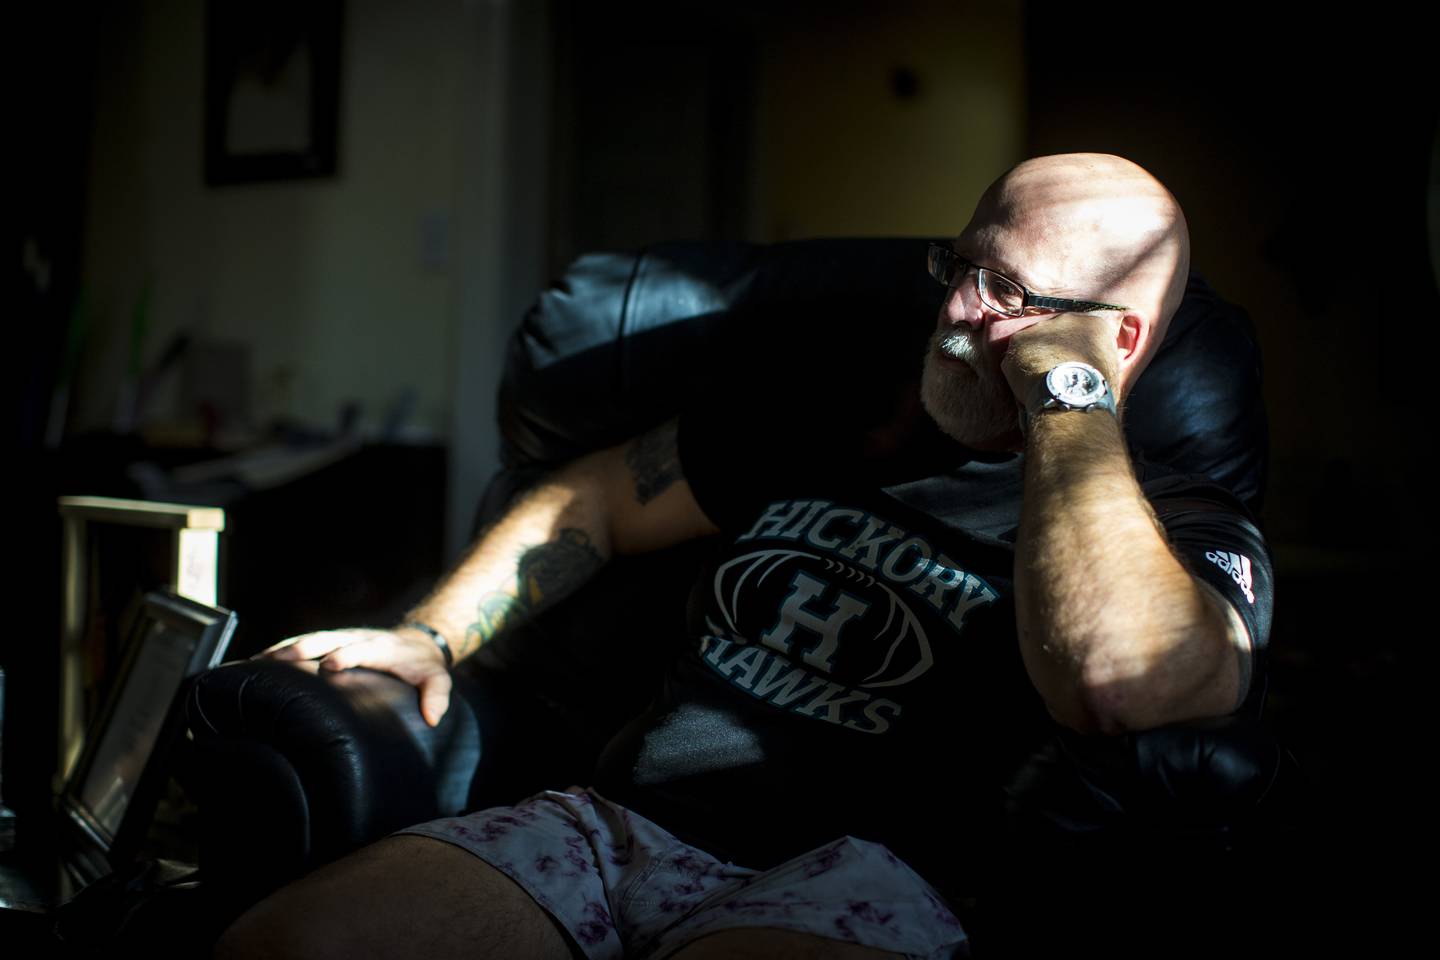 Robert Decker, father of sailor Kody Lee Decker, speaks in his home in Chesapeake, Va., on Tuesday, March 14, 2023, about his son's October 2022 suicide.